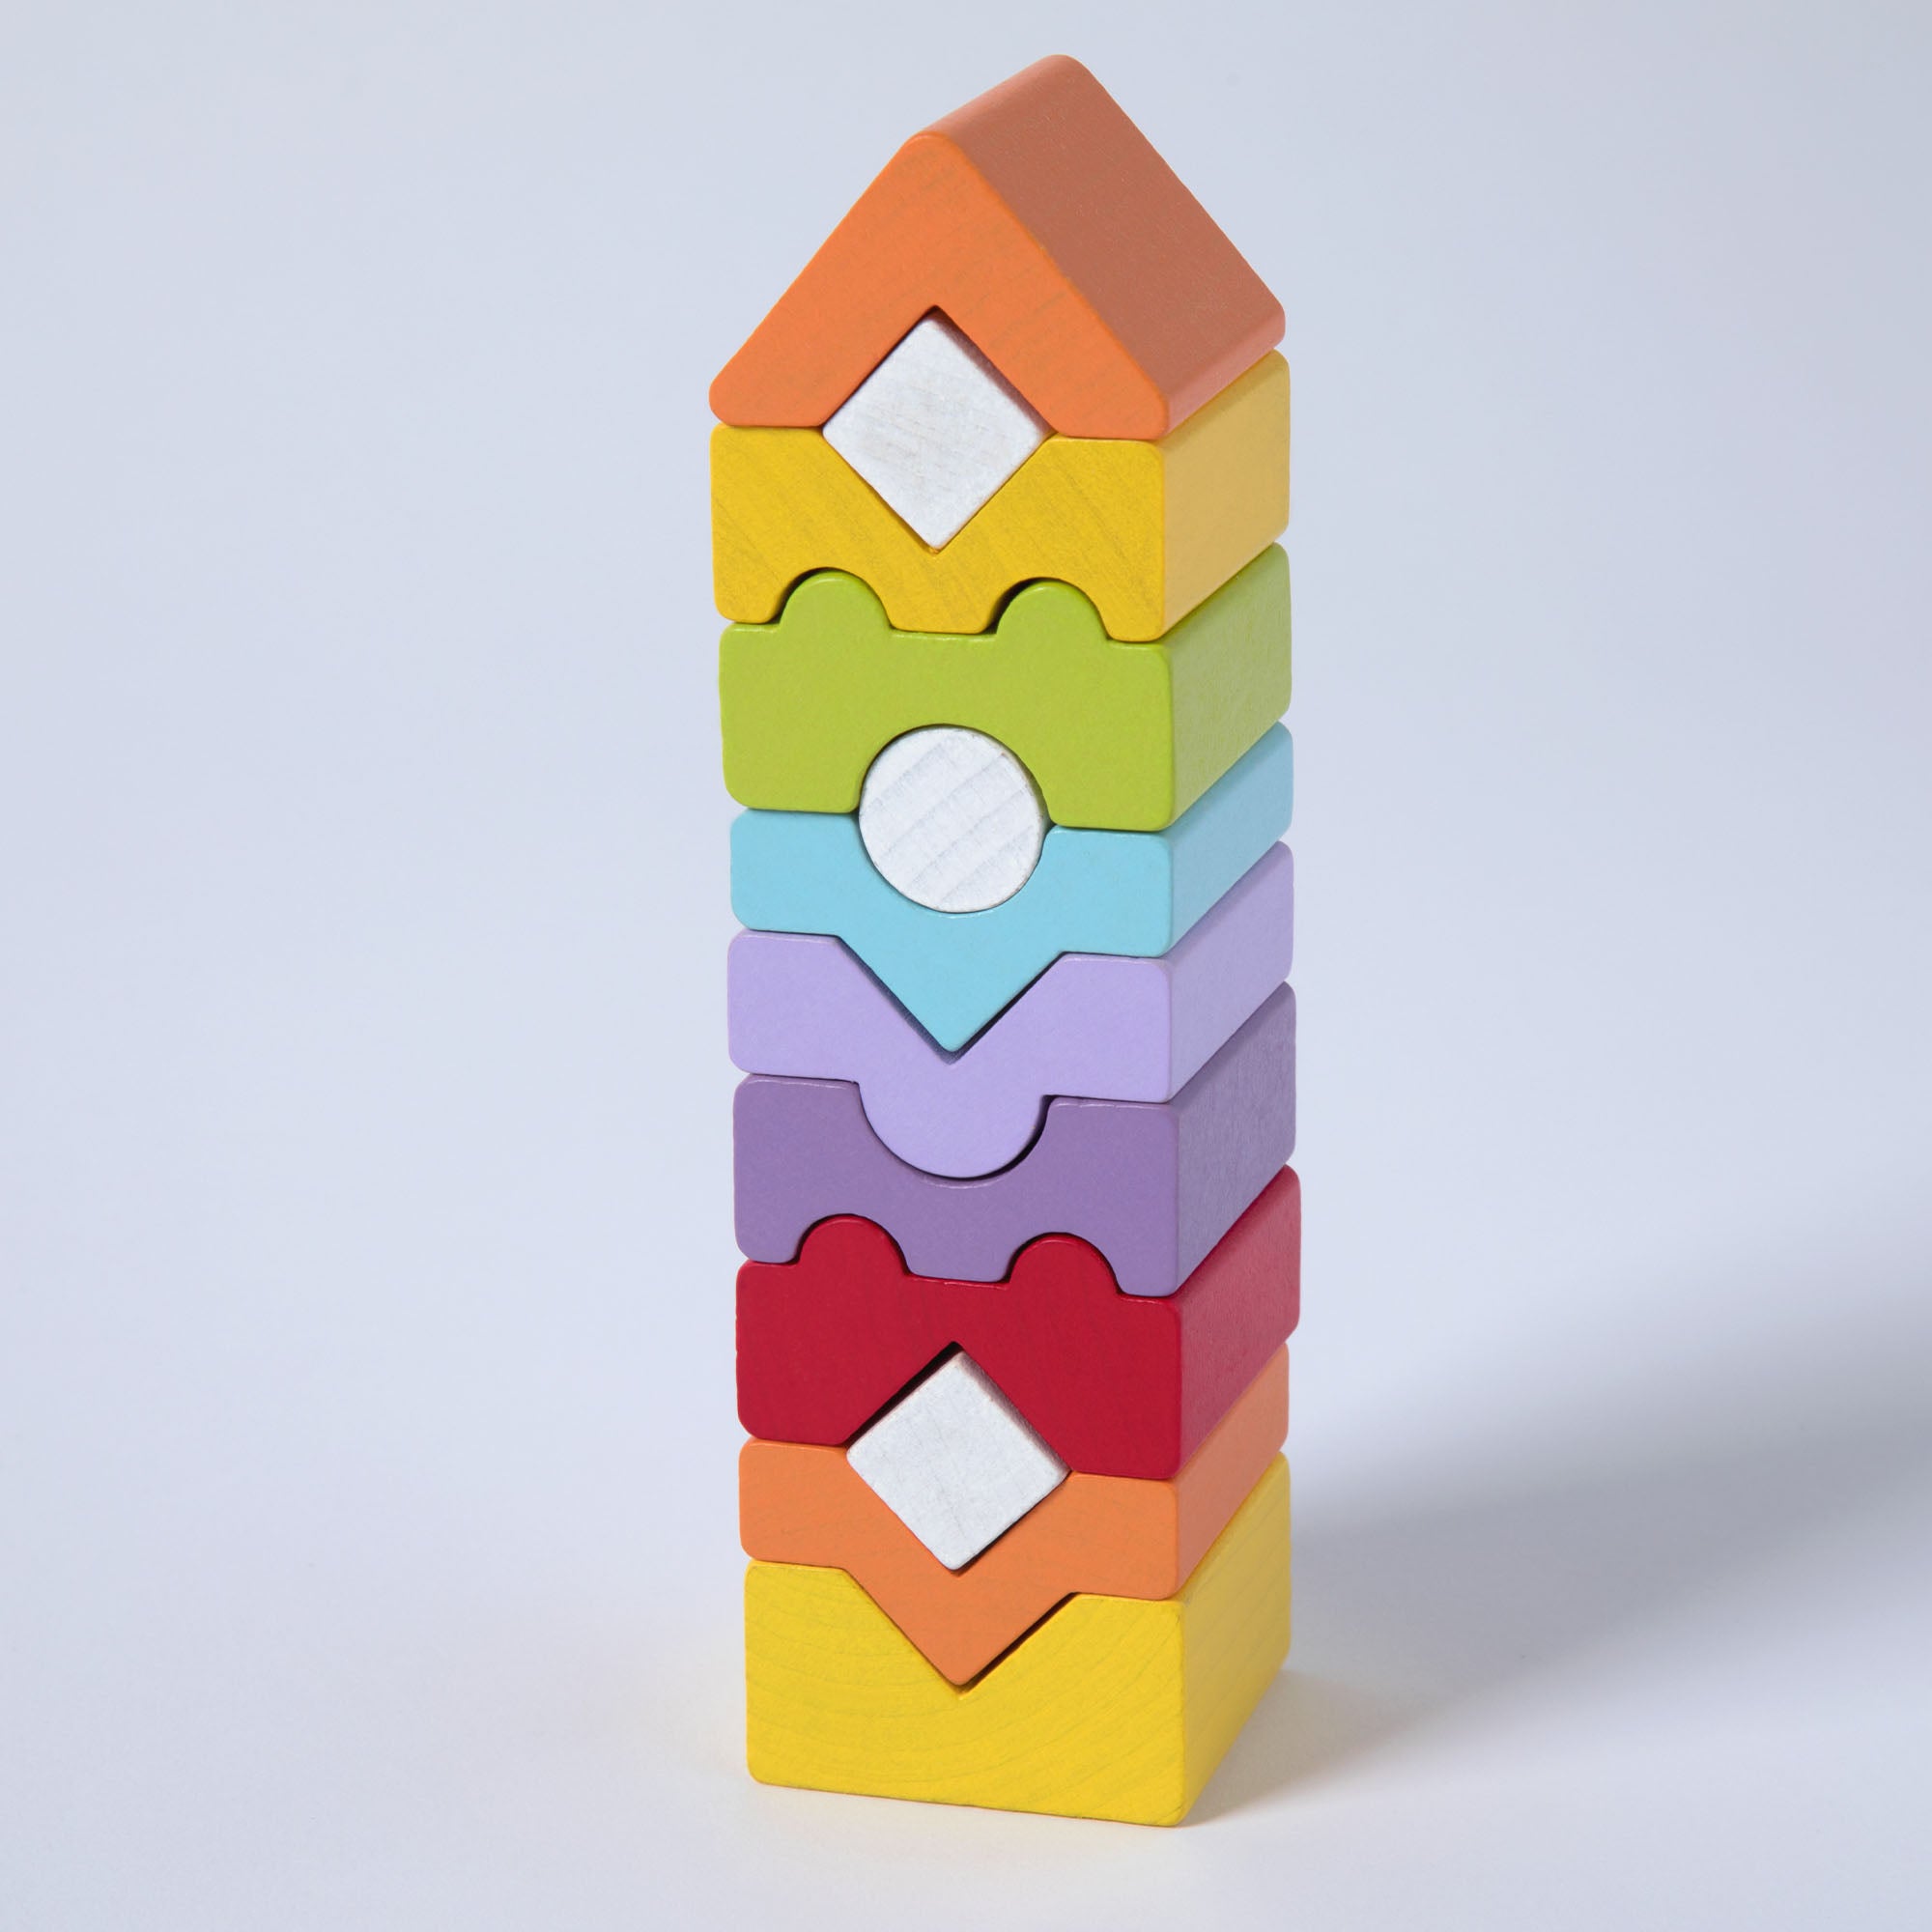 Made In Ukraine Wooden Tower Stacking Puzzle - Give 1